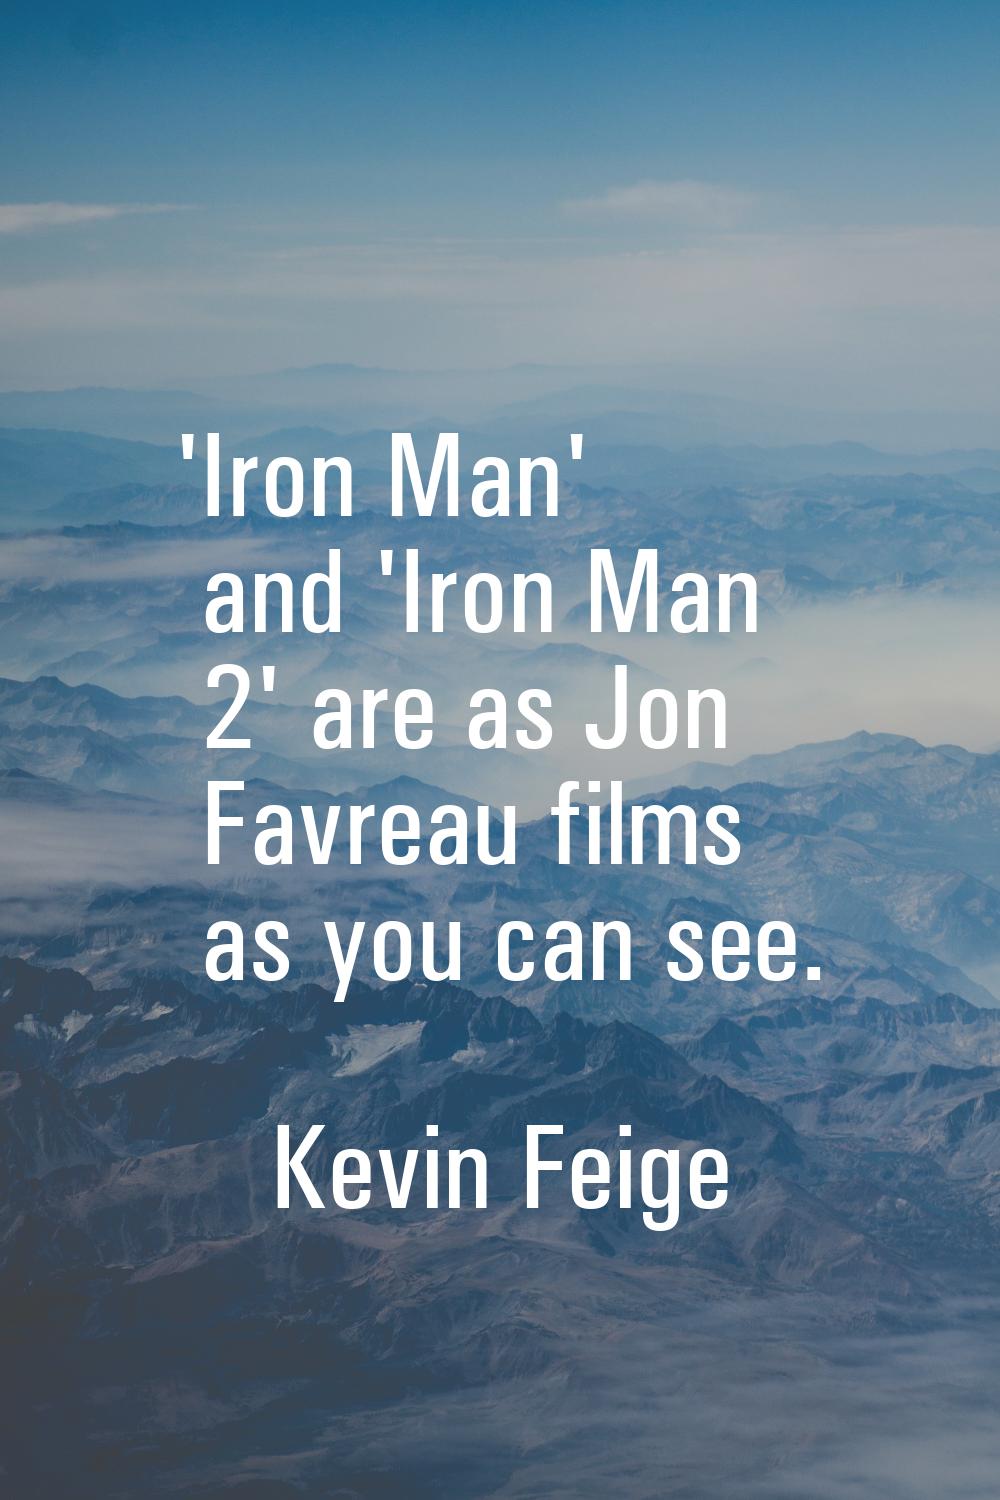 'Iron Man' and 'Iron Man 2' are as Jon Favreau films as you can see.